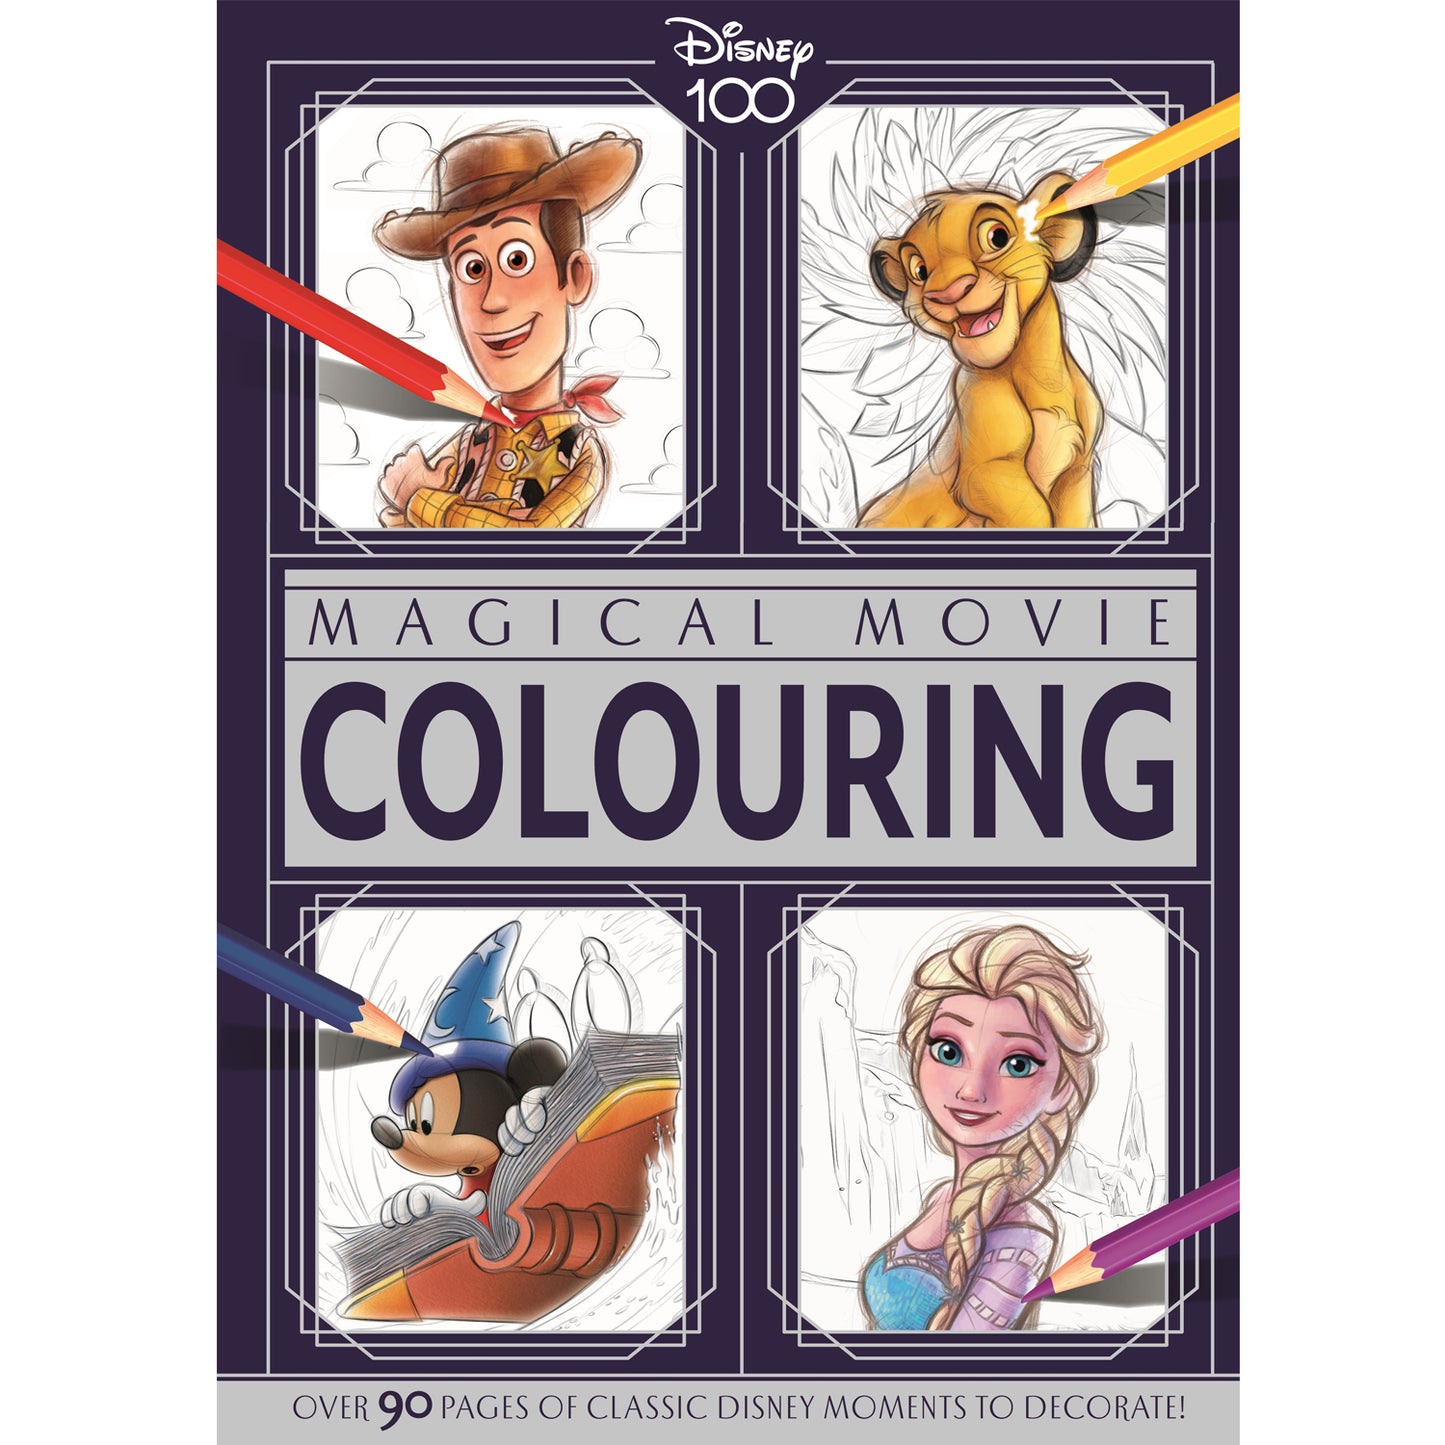 Disney: 100 Years of Disney | Disney 100 Years of Wonder | D100 Colouring Books | Disney mixed colouring book [Paperback] Parragon